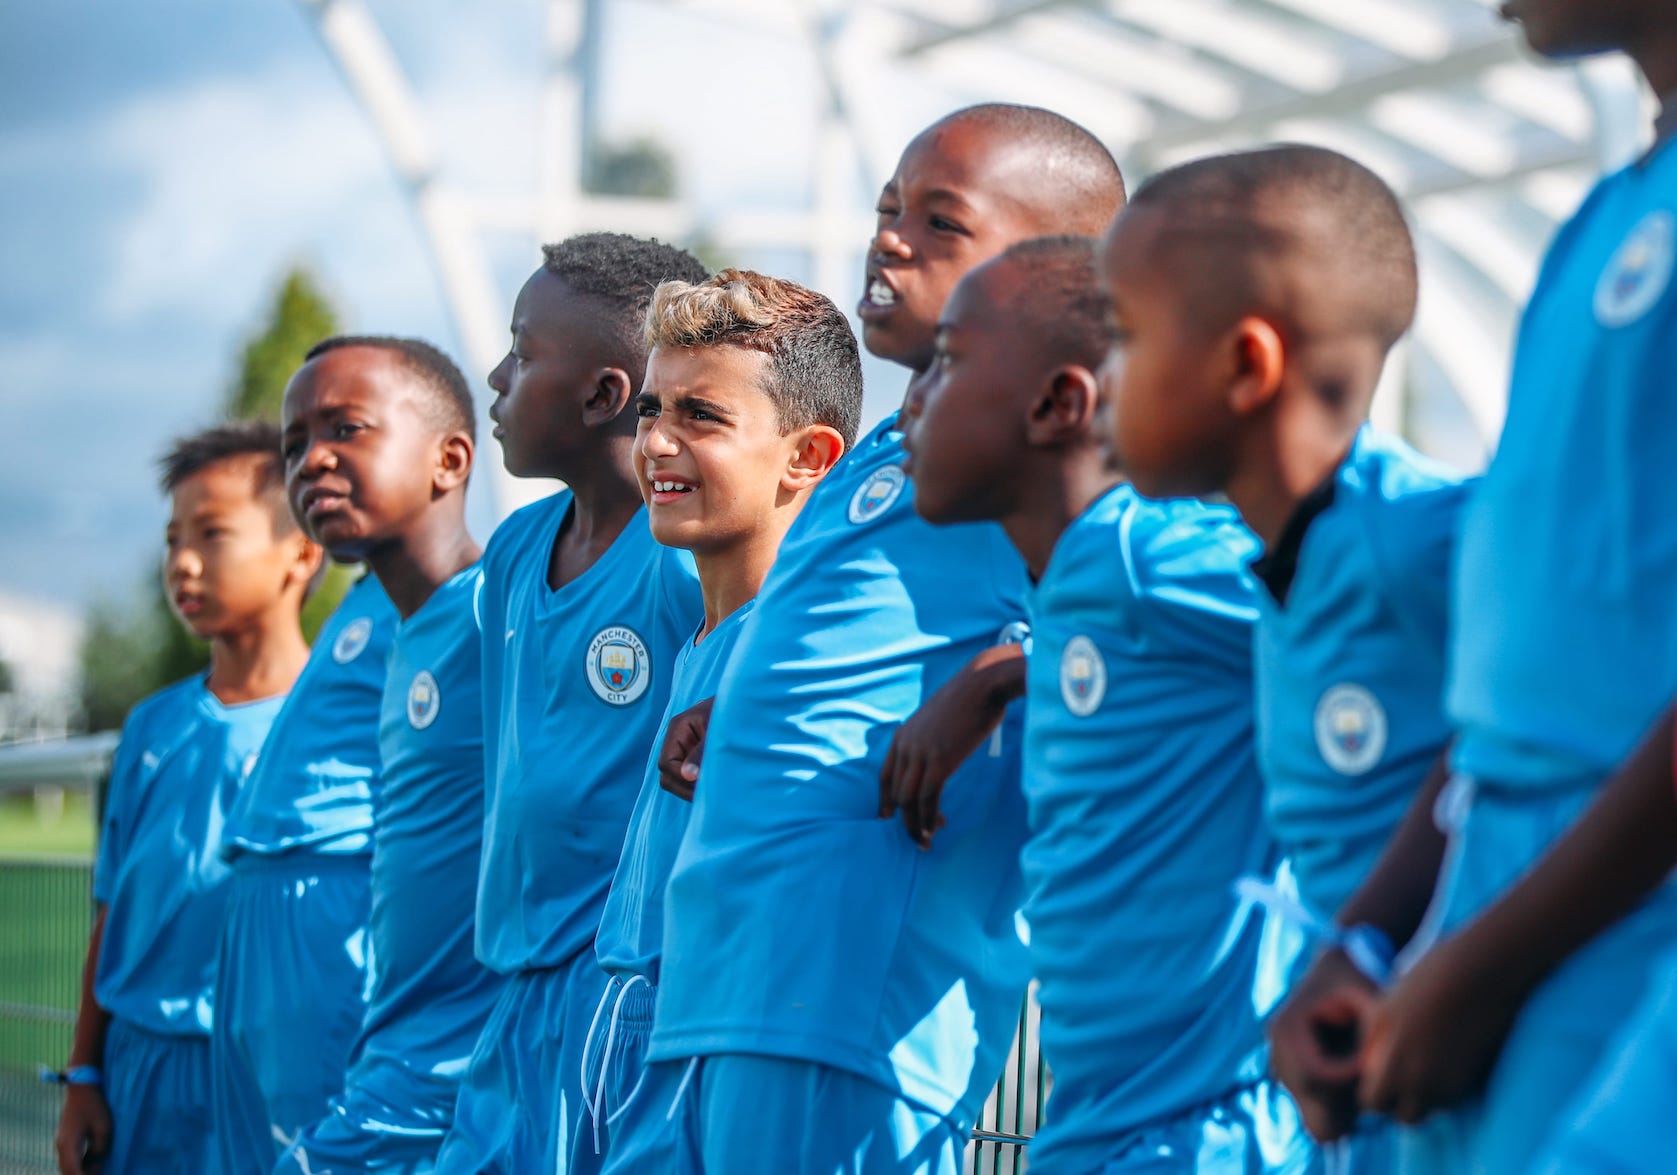 A group of young boys wearing a Manchester City Football kit, leaning against a railing. One boy is looking ahead and smiling.